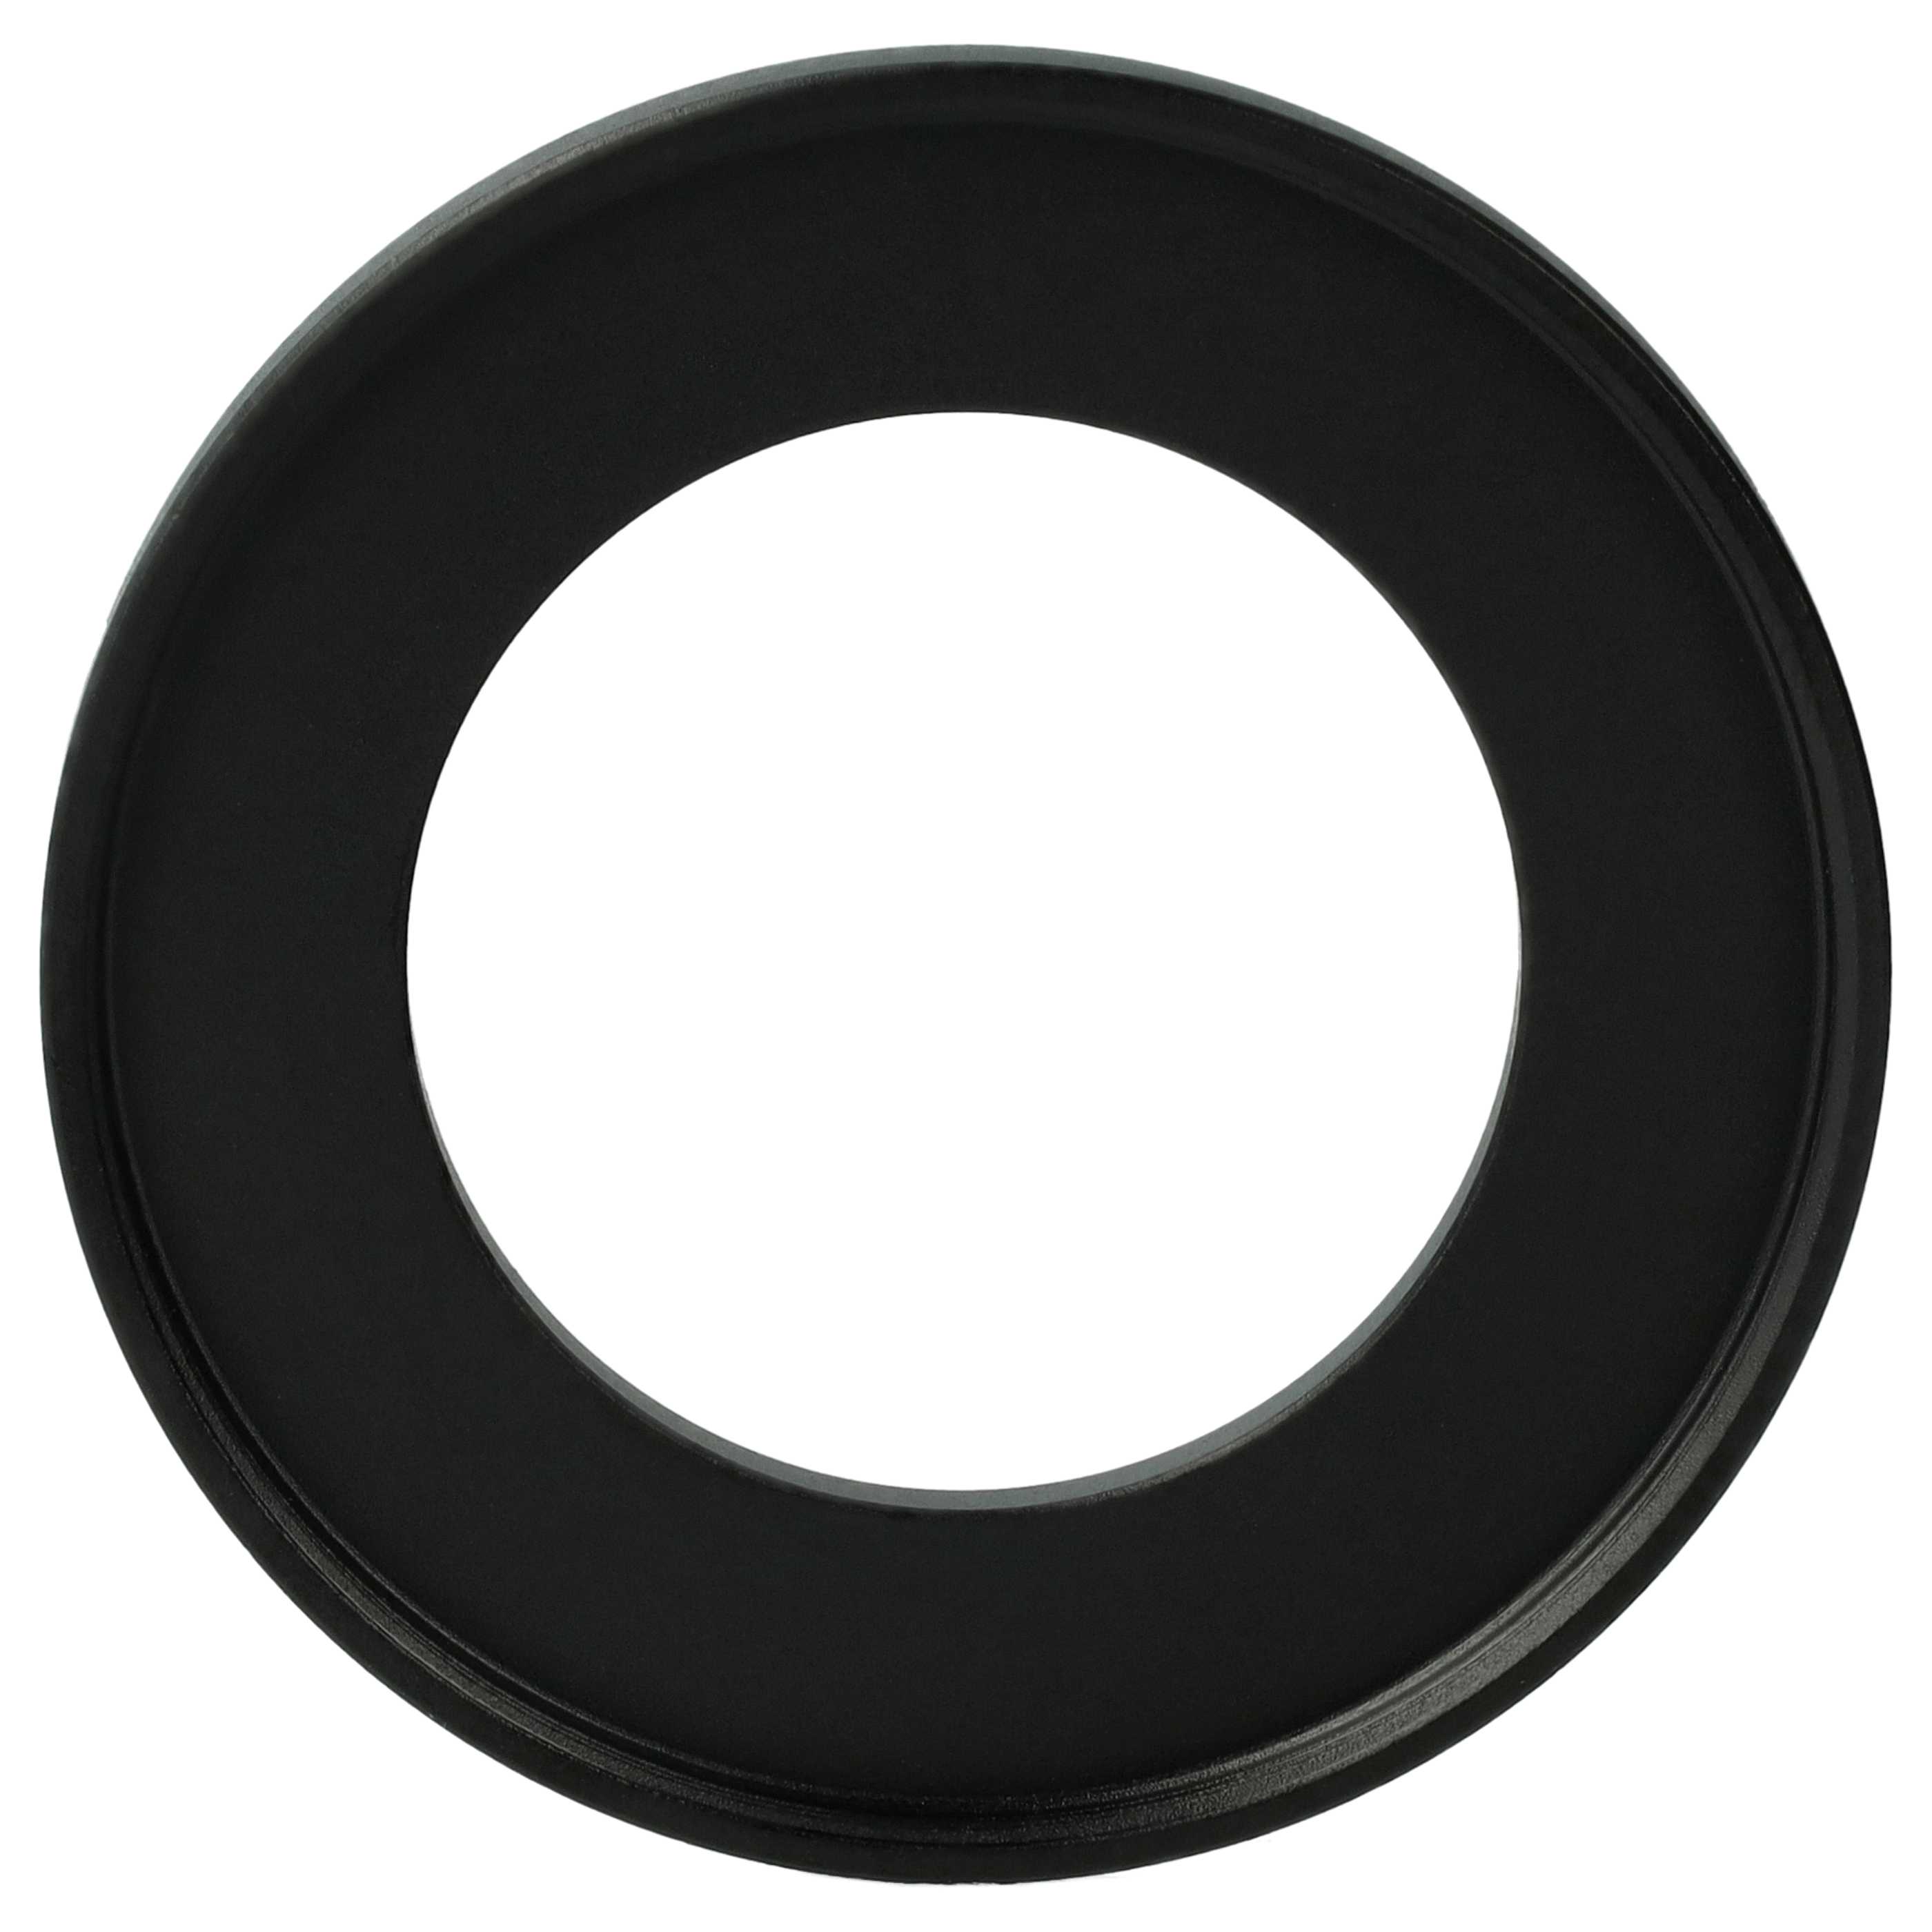 Step-Up Ring Adapter of 34 mm to 49 mmfor various Camera Lens - Filter Adapter